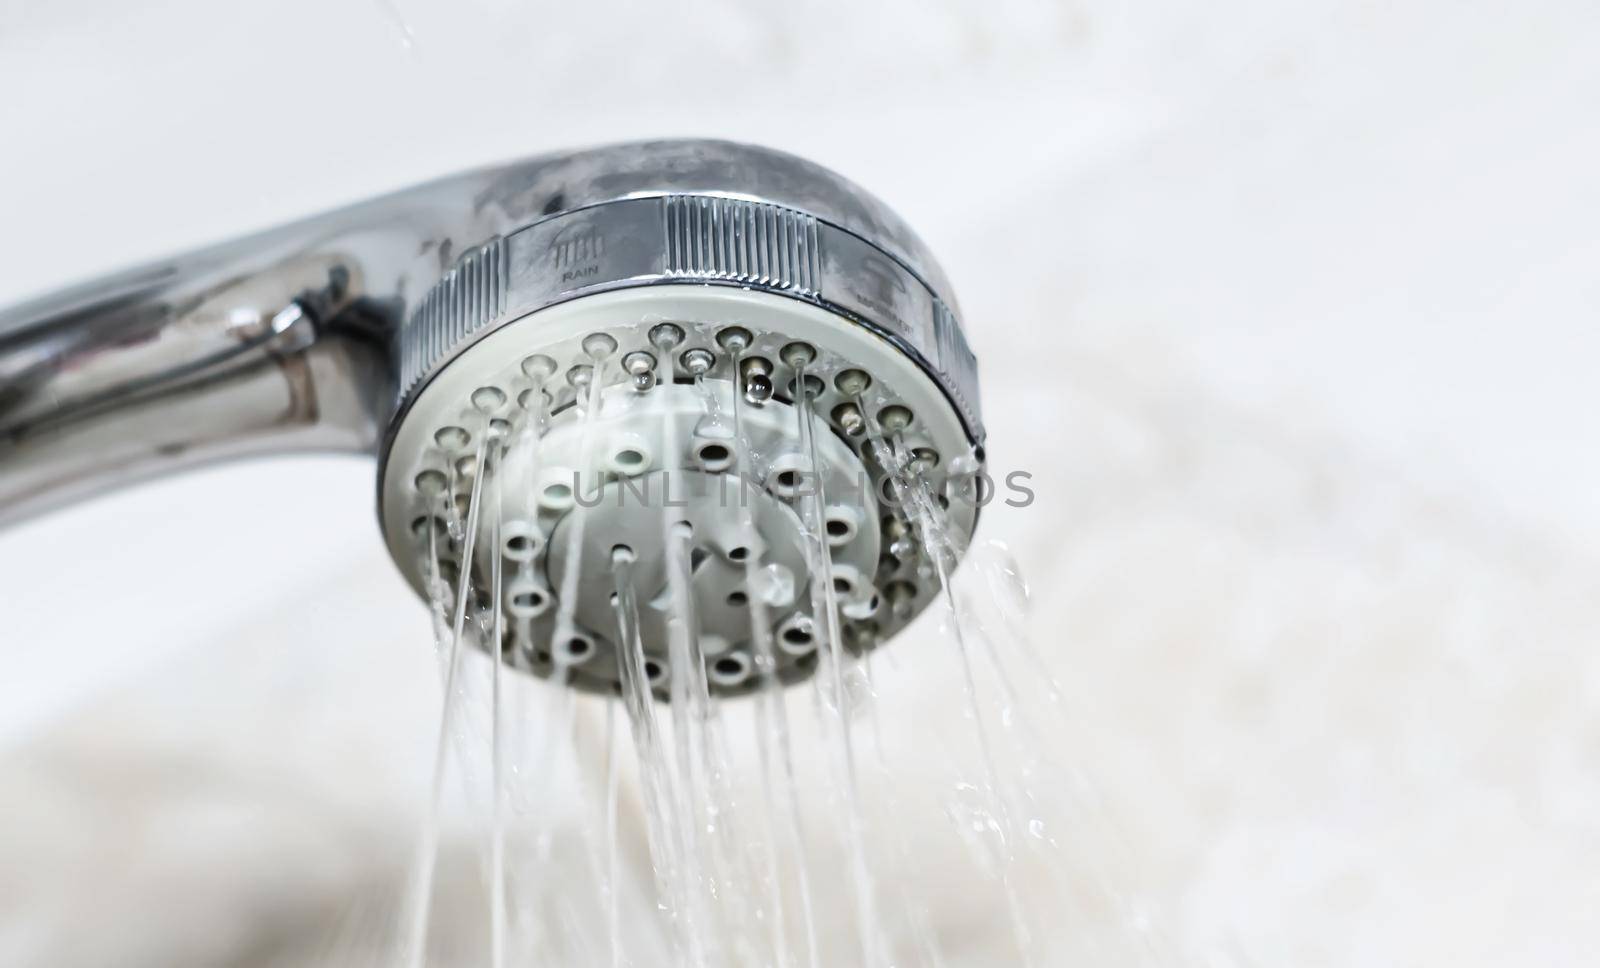 Interior of a shower with water flowing from the shower head. Droplets and moisture. Hygiene and personal care